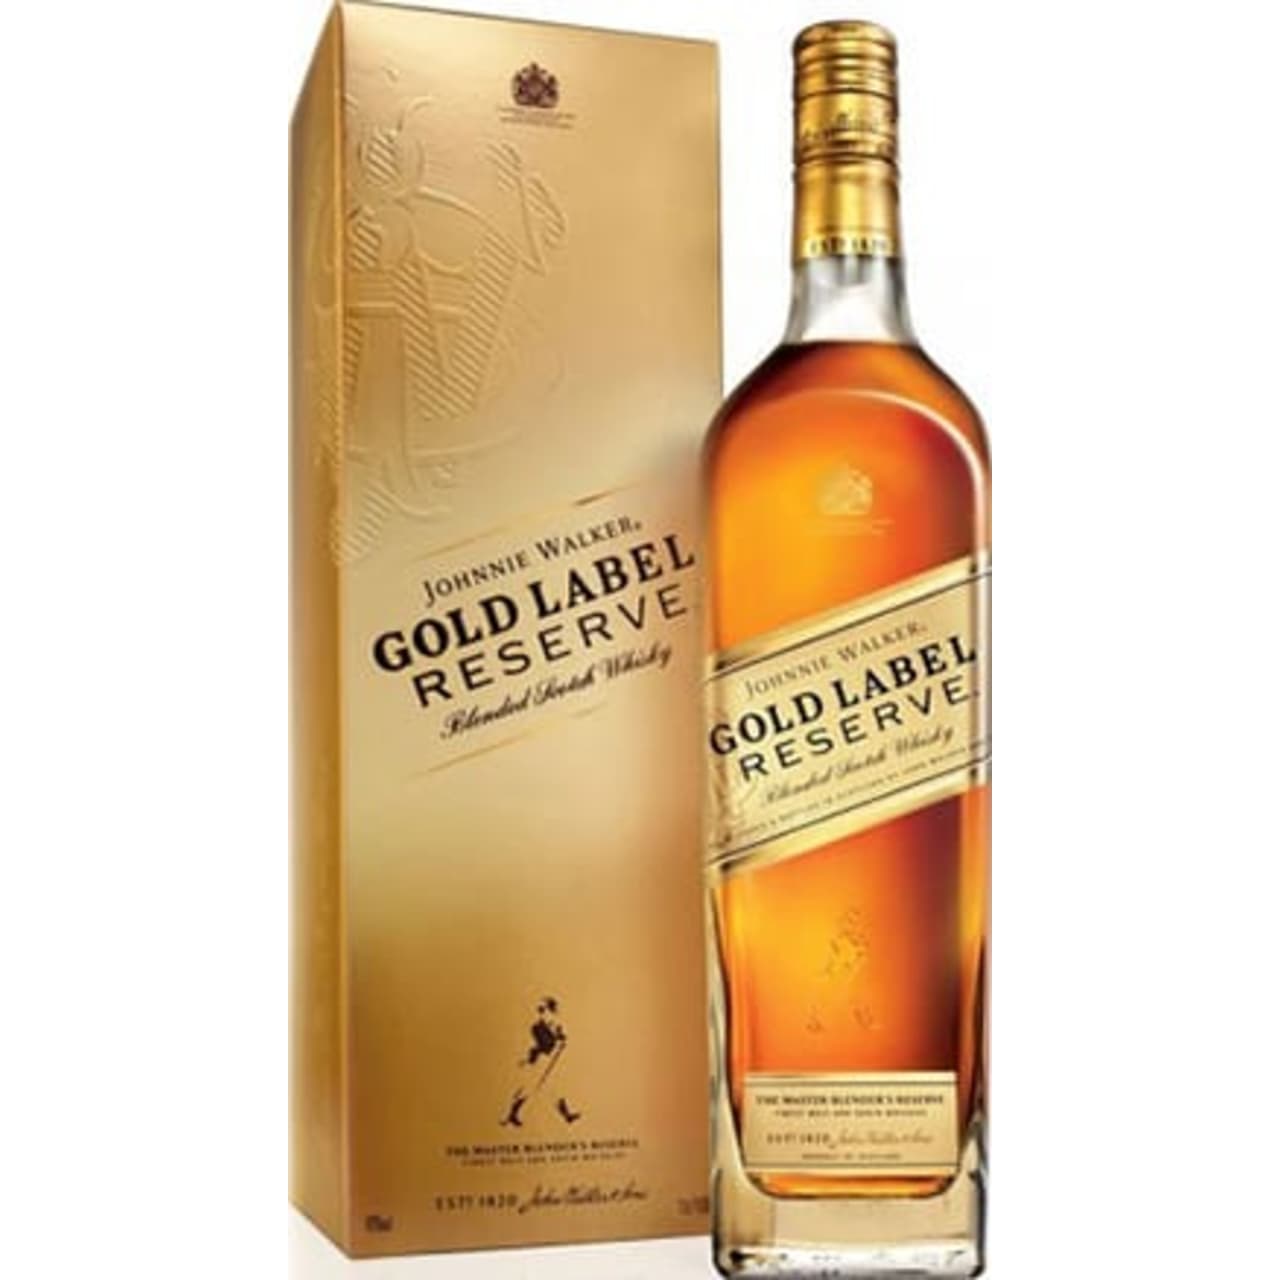 Jim Beveridge blended Johnnie Walker Gold Label Reserve so that its flavours unfold in waves, with rich fruit and vanilla alongside spicy and sweet woody notes and a gentle smokiness.